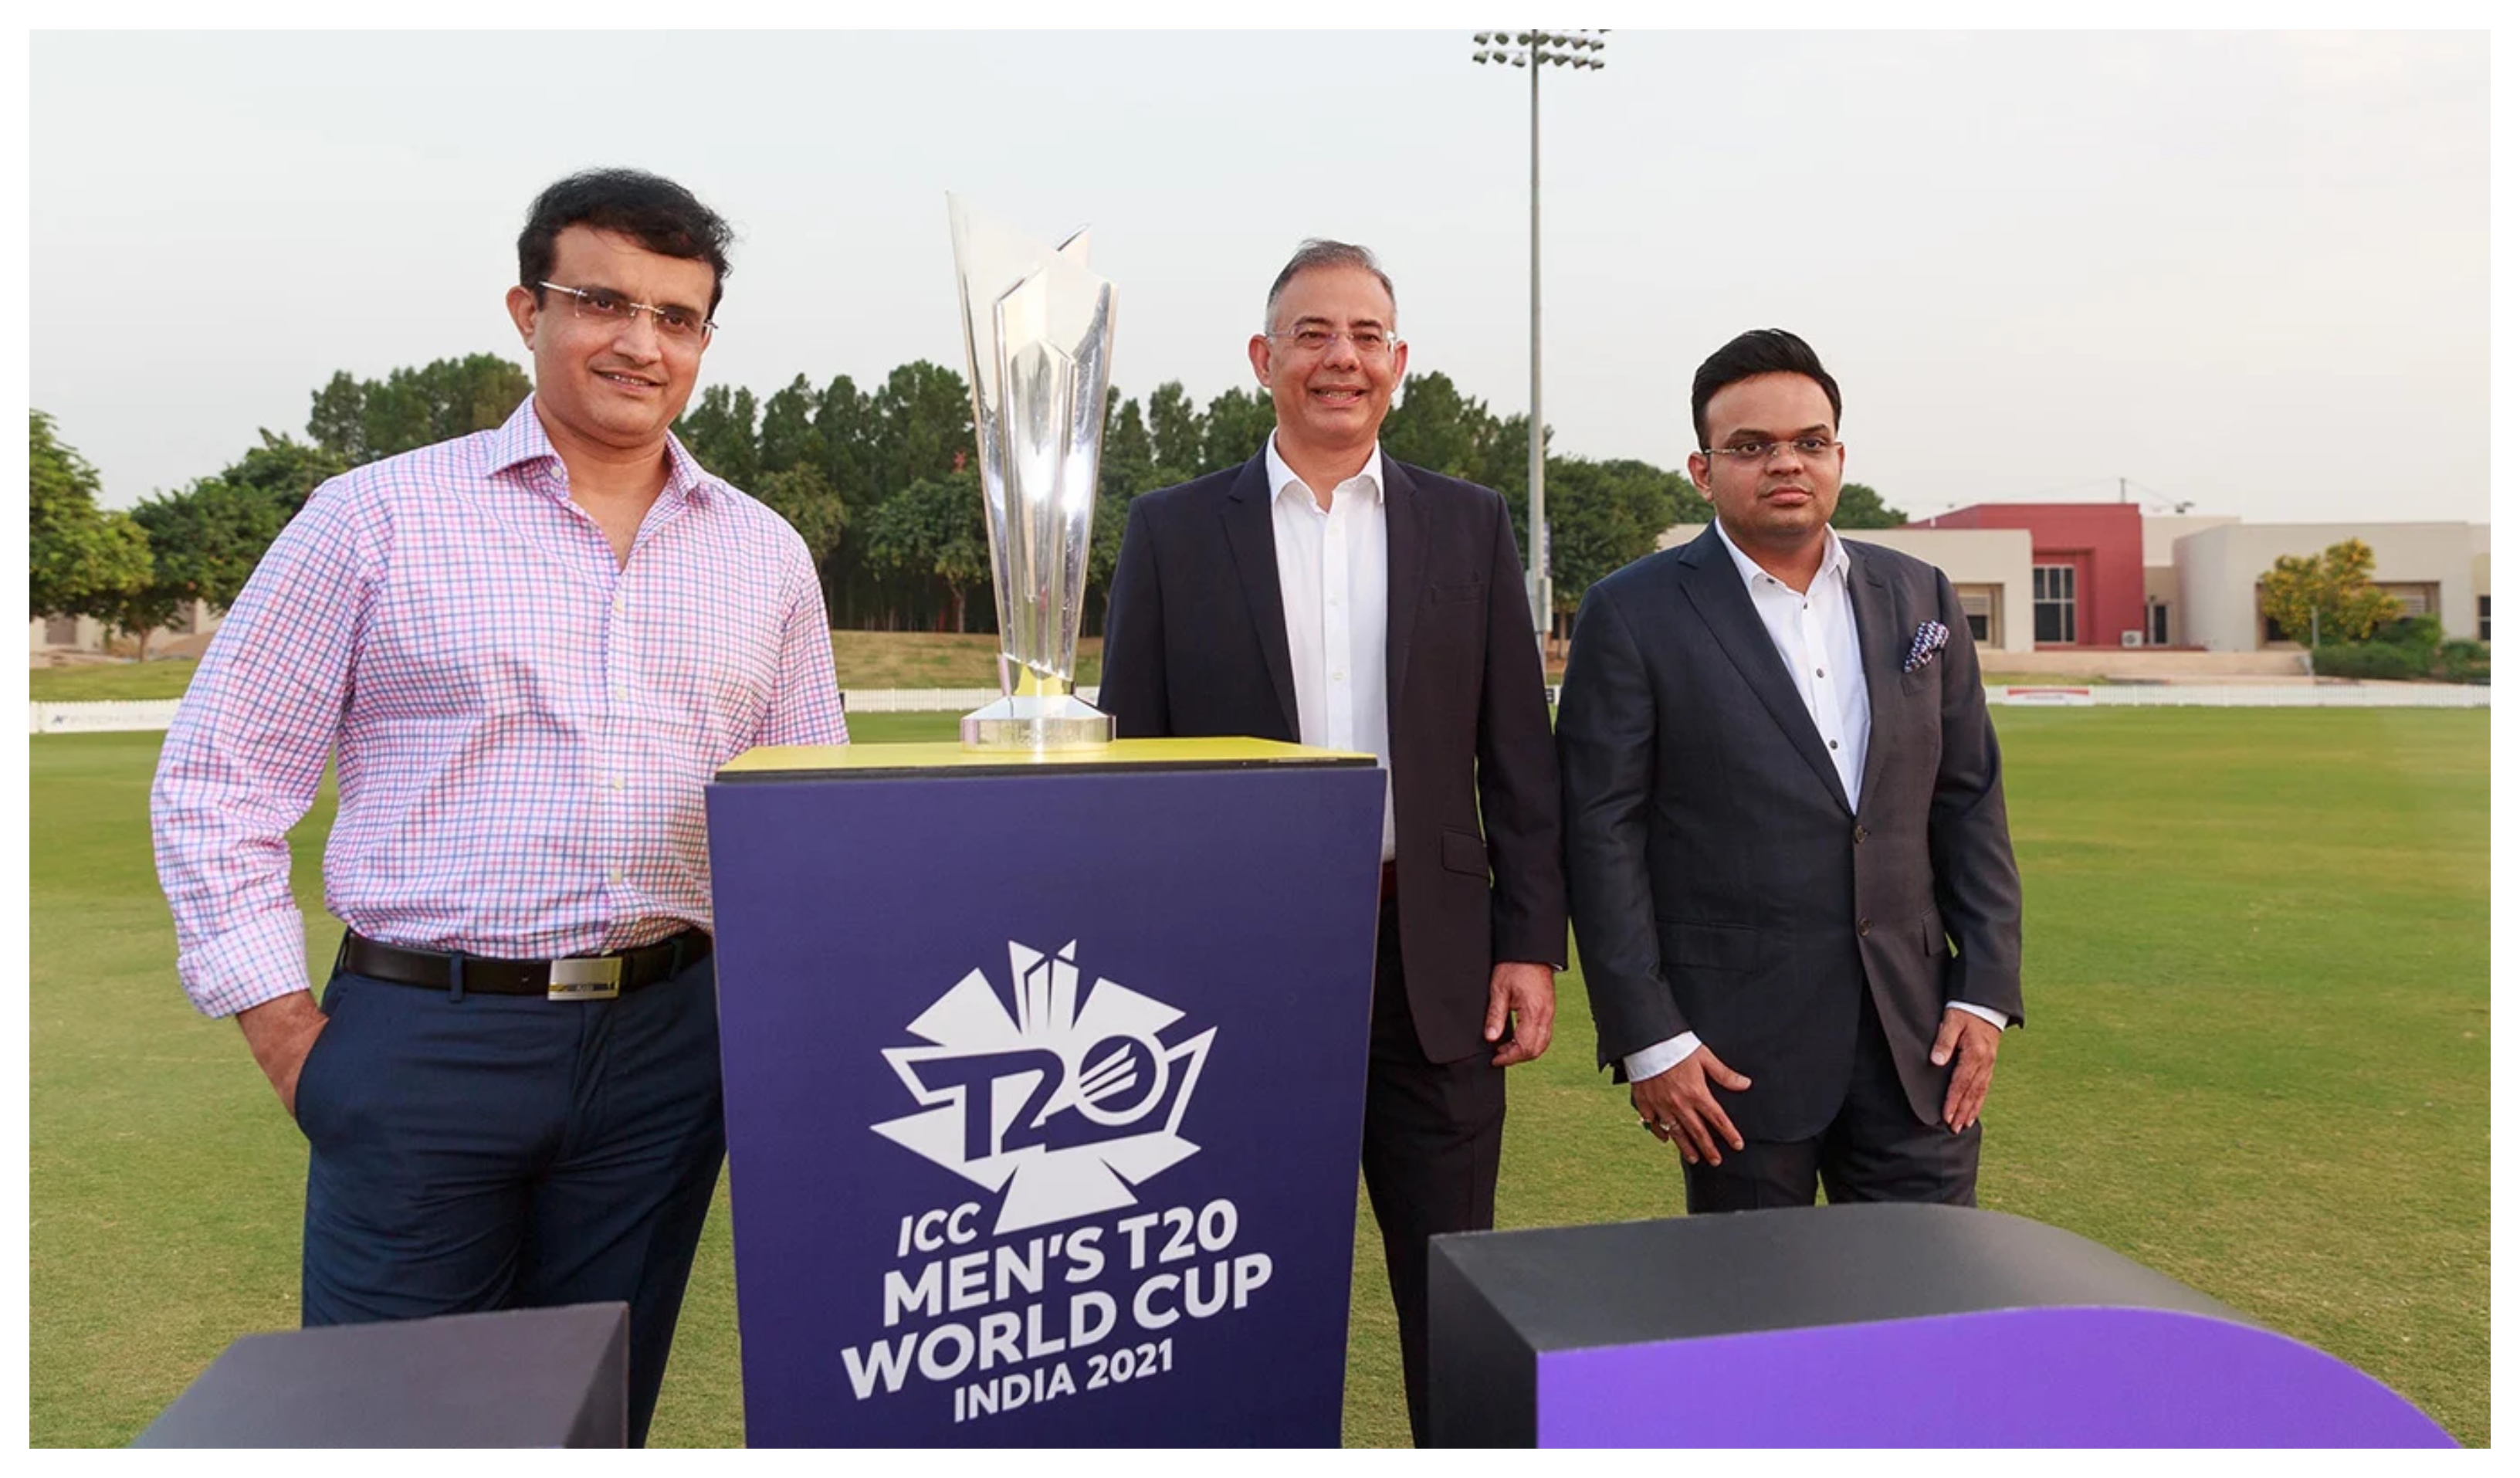 ICC T20 World Cup 2021 will be held in UAE and Oman | ICC/Twitter